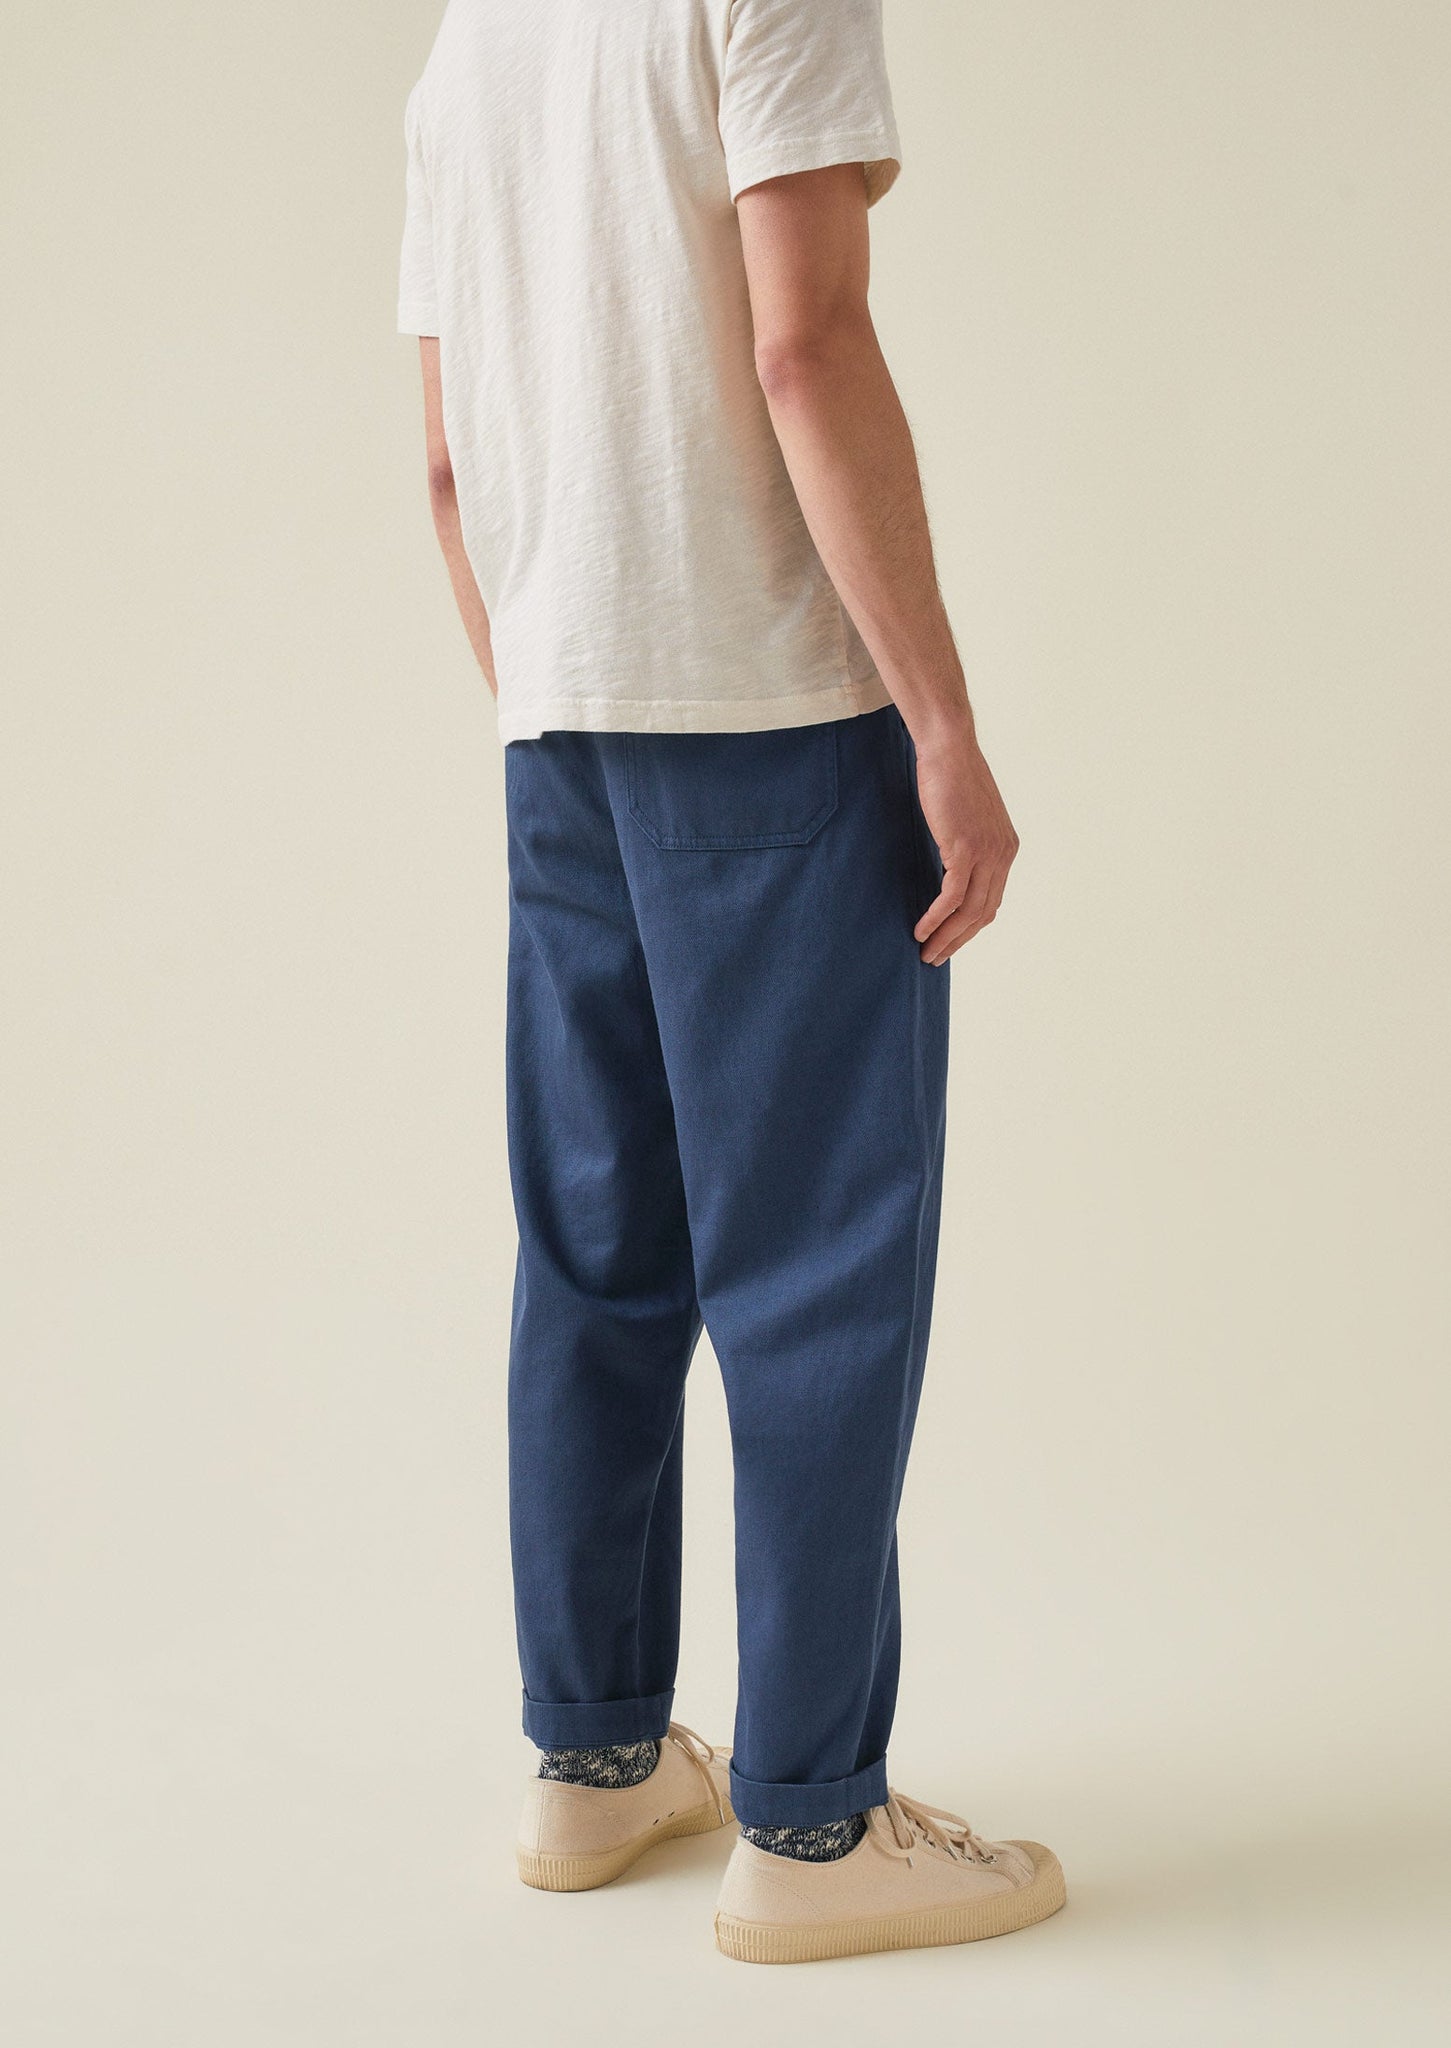 Duncan Exaggerated Tapered Pants | Delft Blue